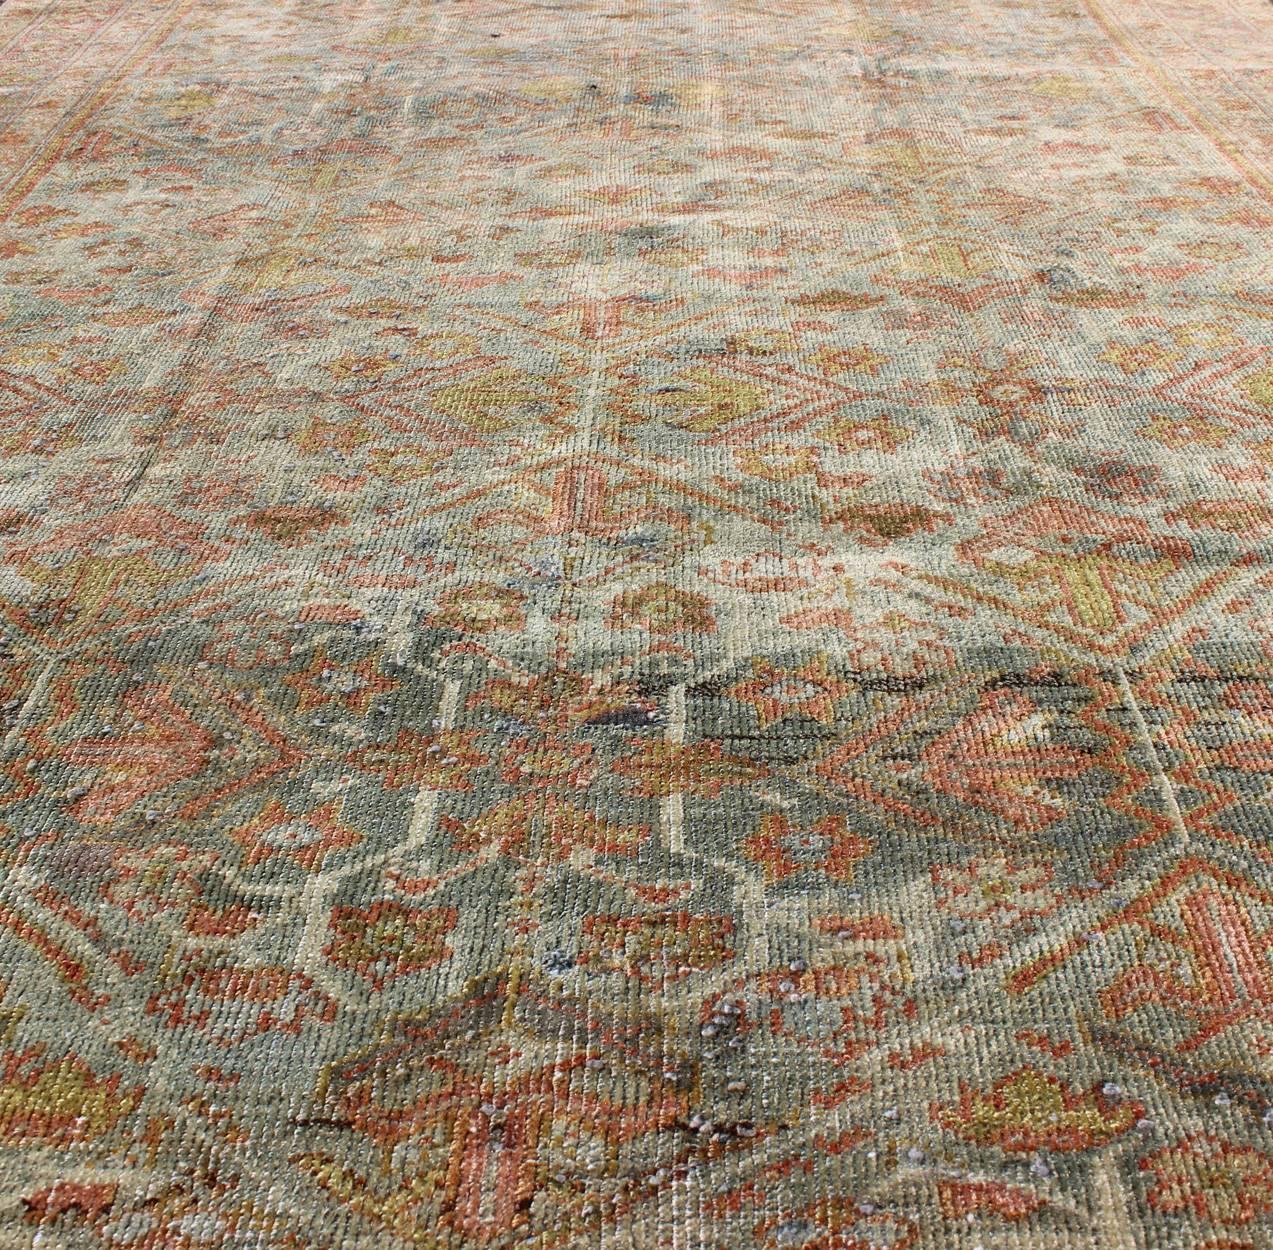 Hand-Knotted Antique Persian Mahal Rug with Flowing Floral Pattern in Gray, Red, Acid Yellow